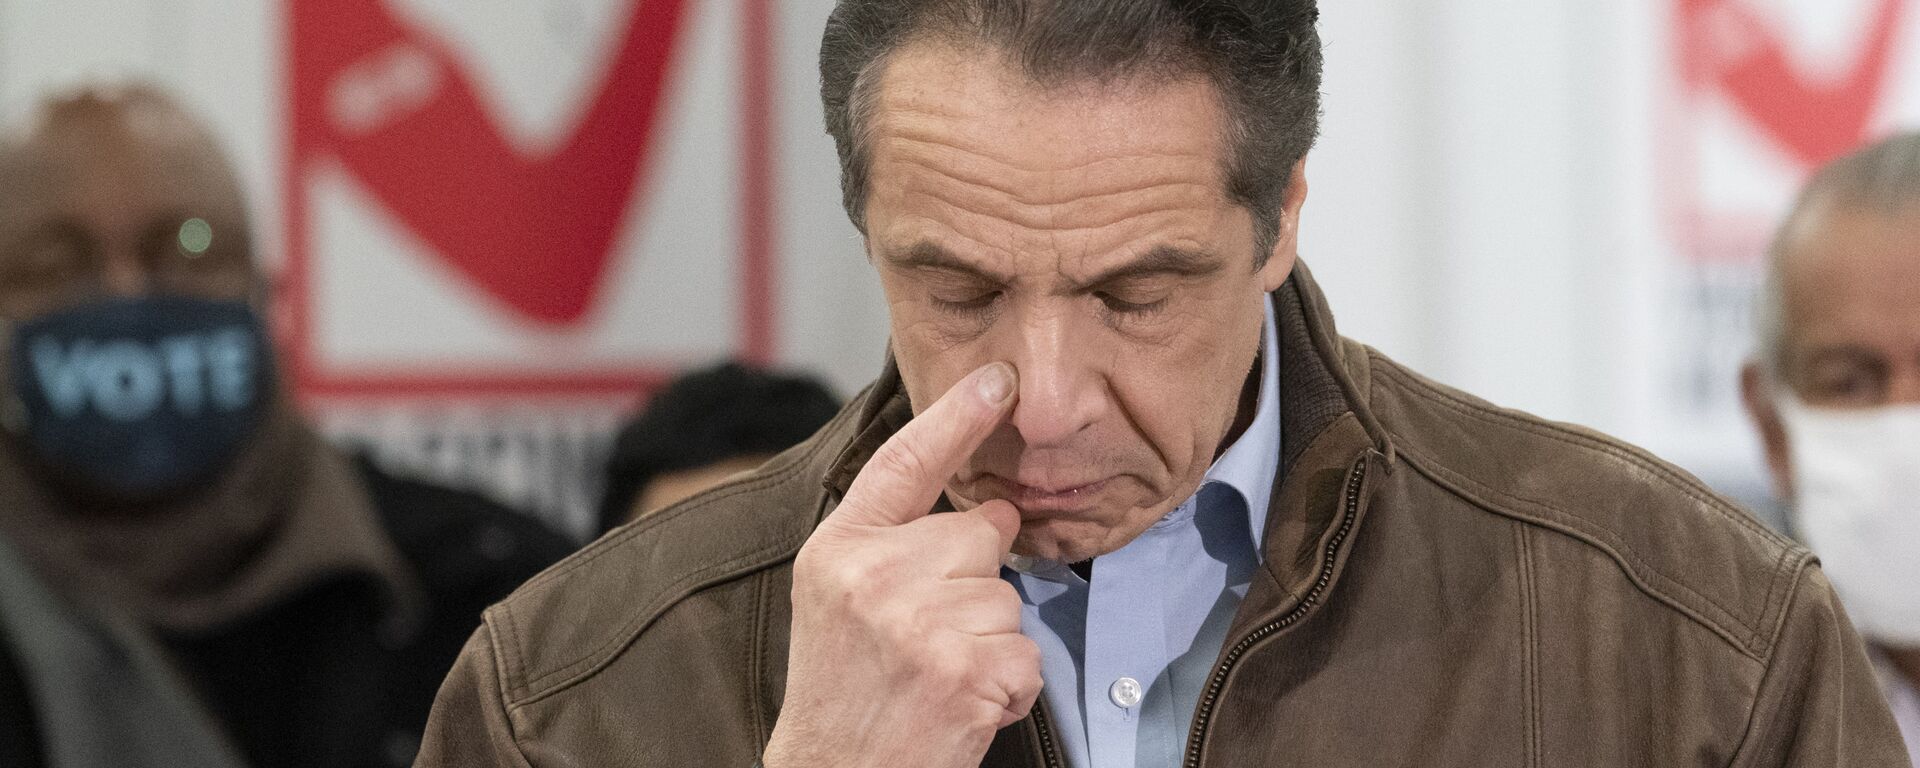 New York Gov. Andrew Cuomo touches his nose during a visit to a new COVID-19 vaccination site, Monday, March 15, 2021, at the State University of New York in Old Westbury. The site is scheduled to open on Friday.  - Sputnik International, 1920, 22.11.2021